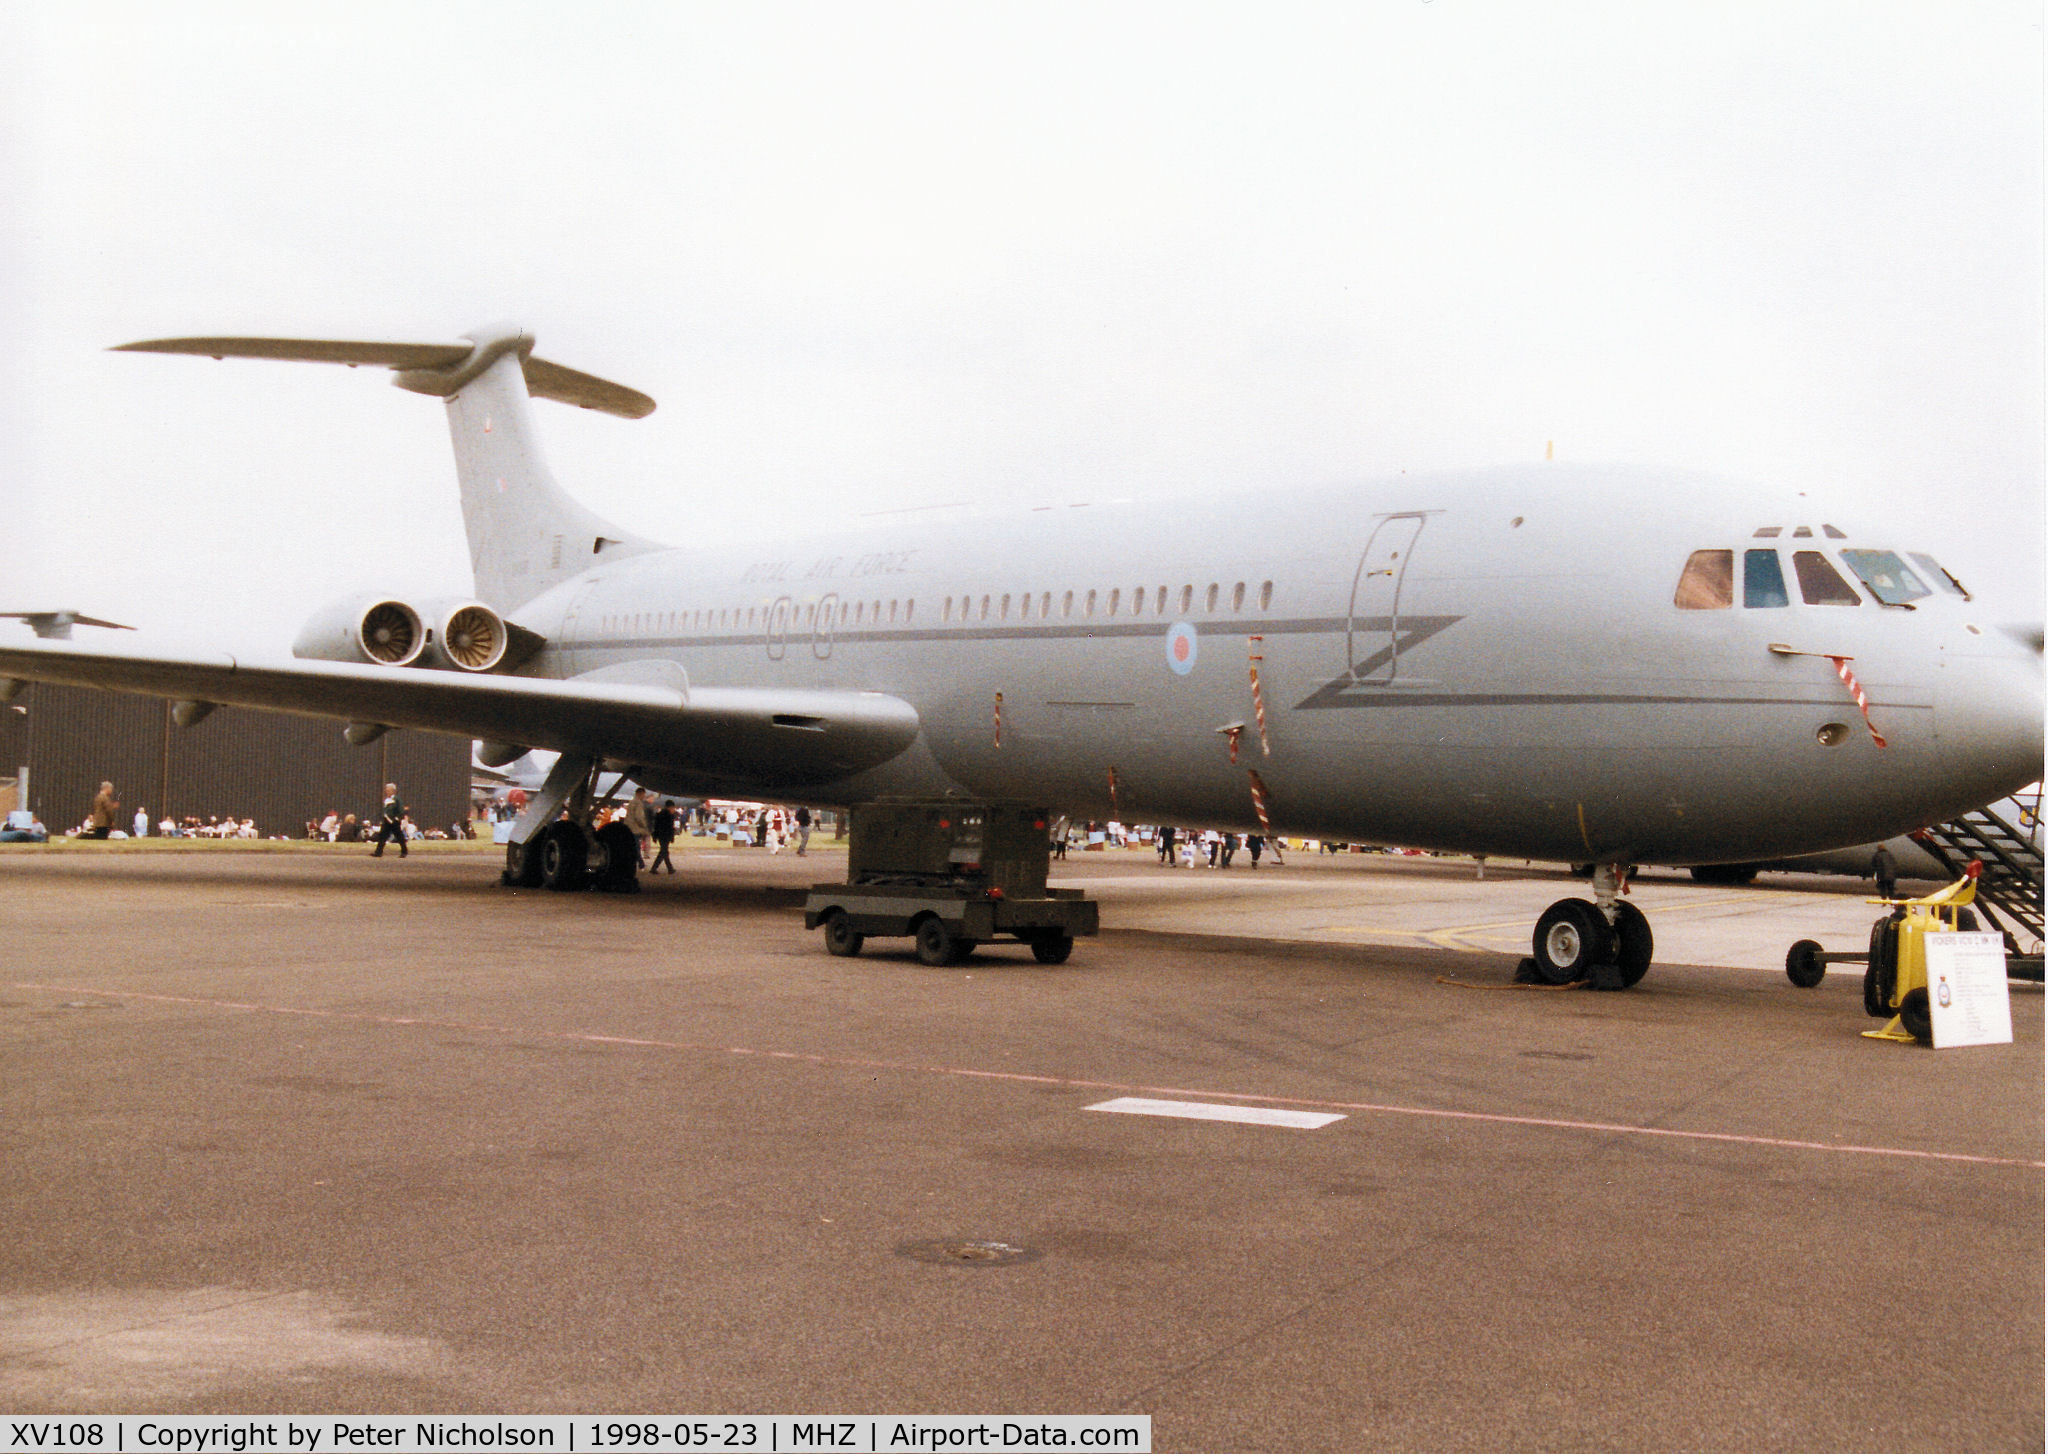 XV108, 1968 Vickers VC10 C.1K C/N 838, VC-10 C.1K of 10 Squadron at RAF Brize Norton on display at the 1998 RAF Mildenhall Air Fete.